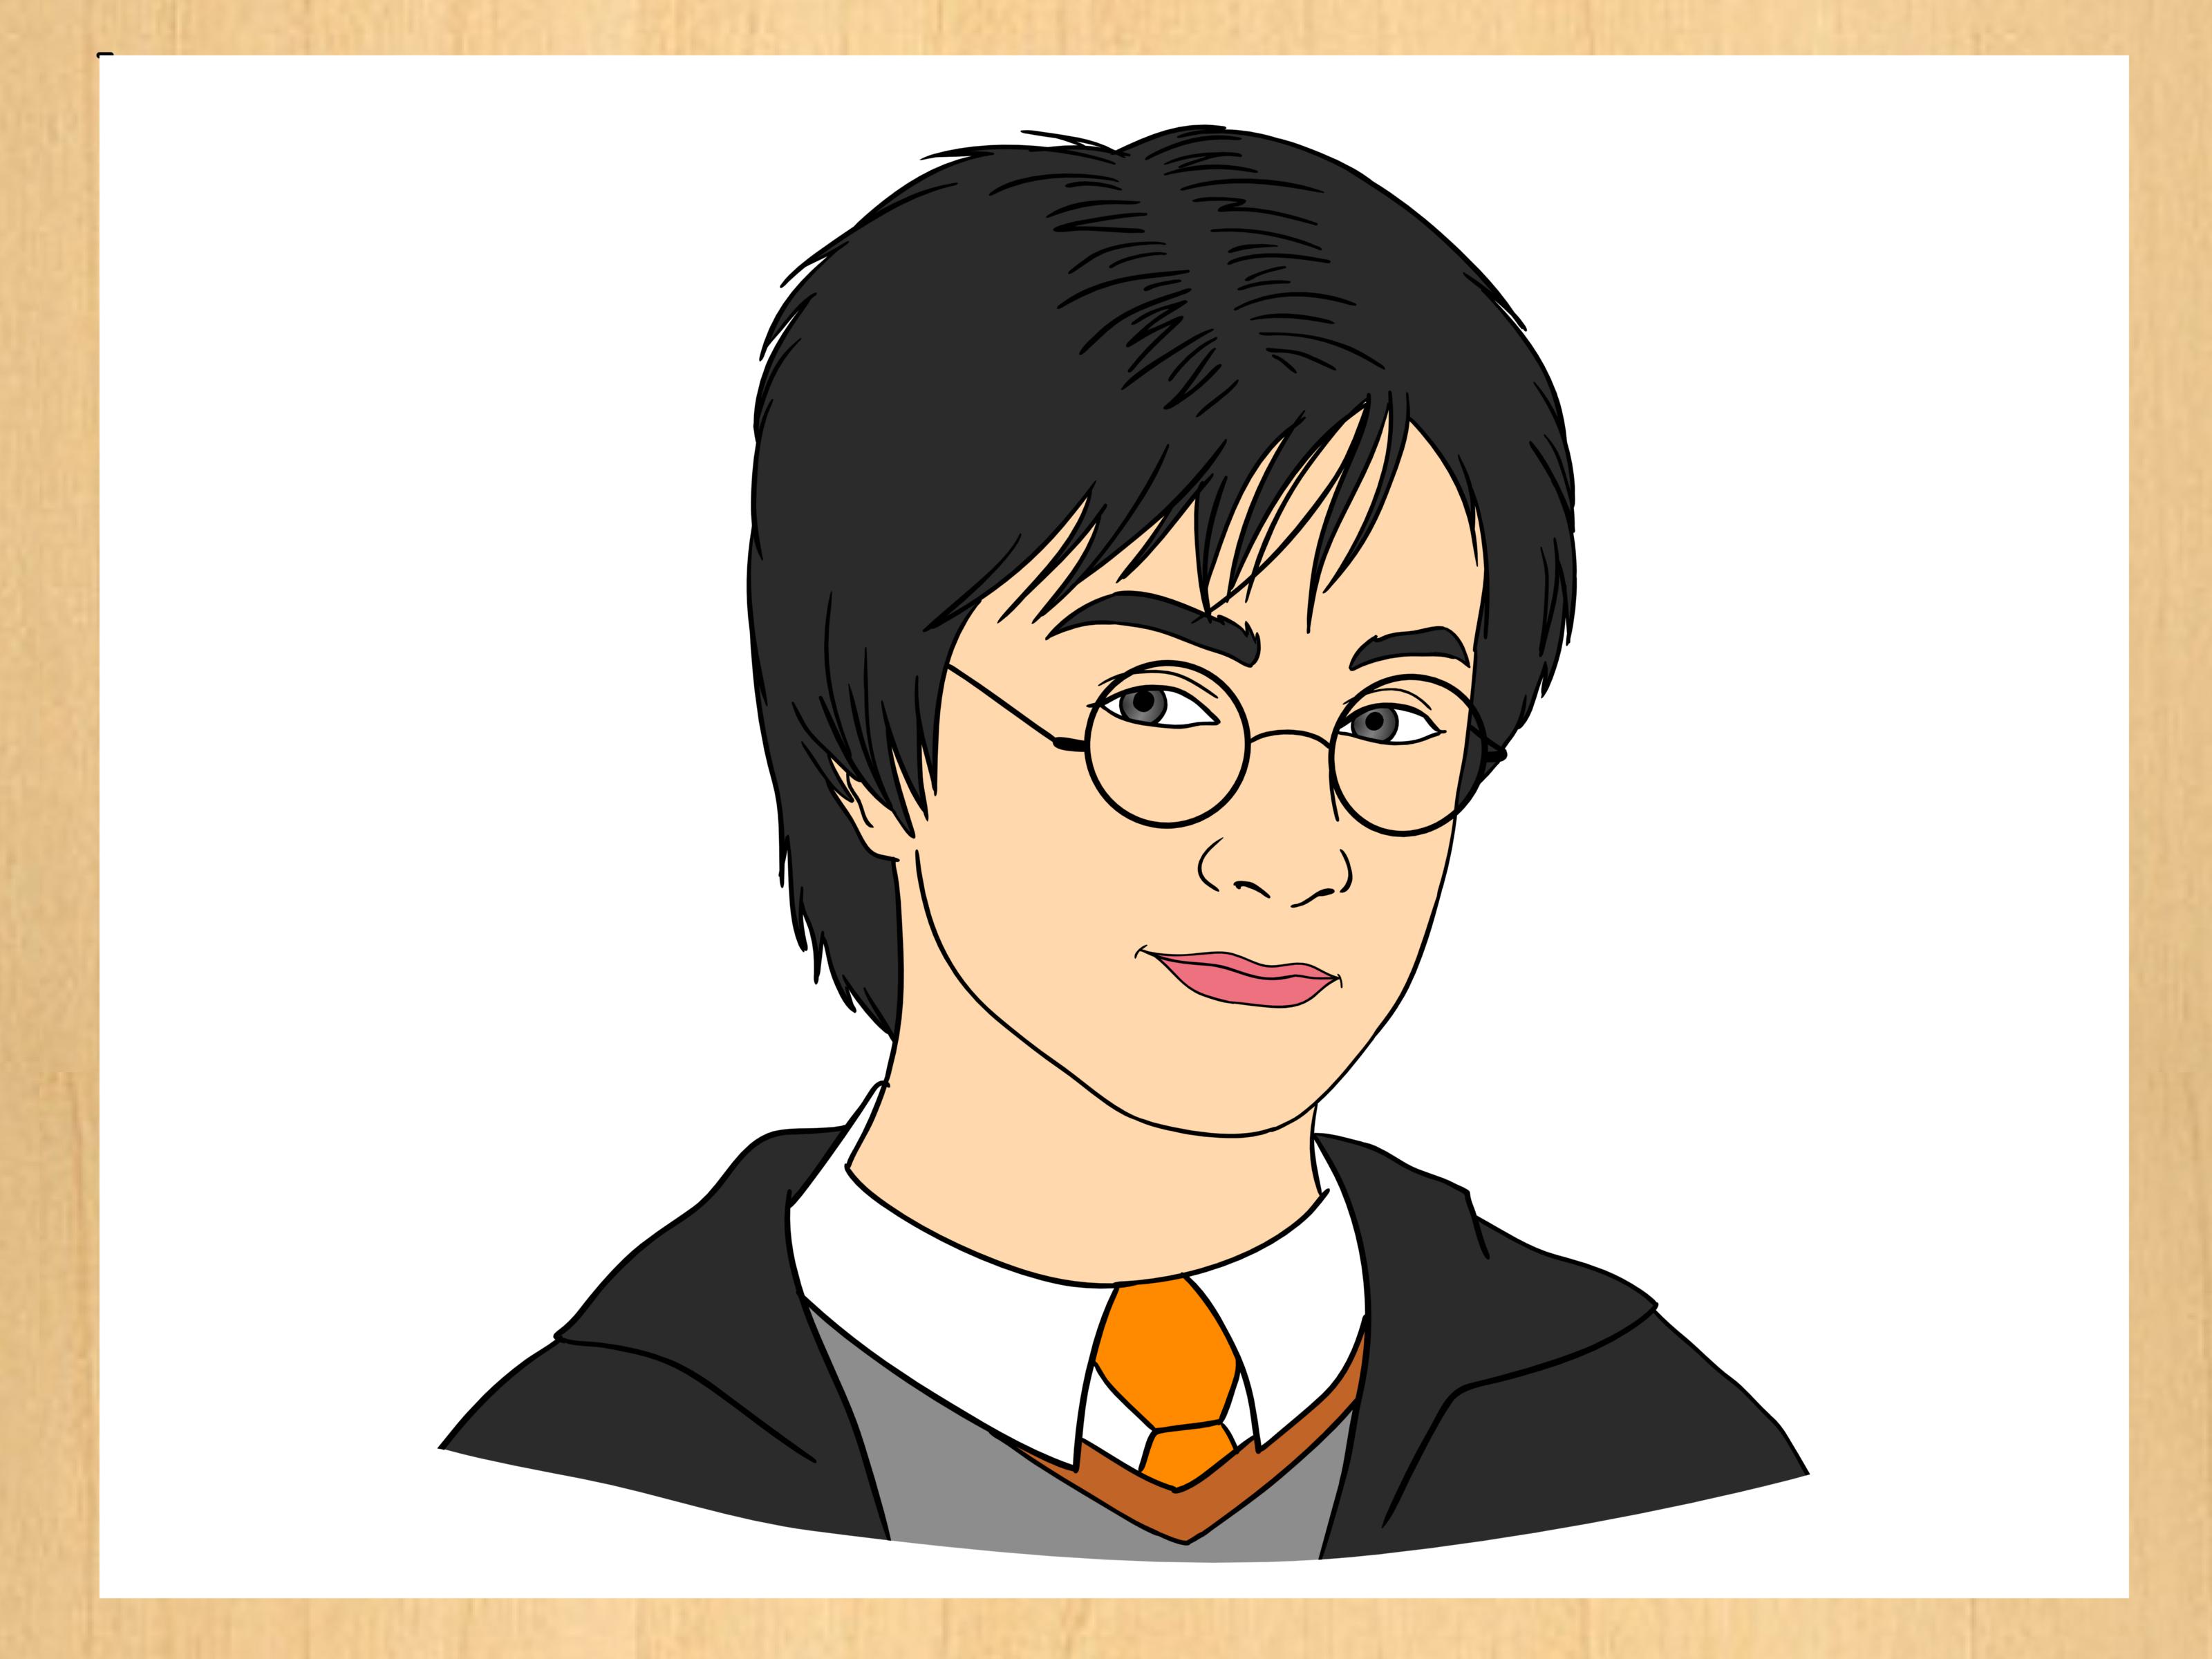 Image Titled Draw Harry Potter Step - Easy To Draw Harry Potter Characters - HD Wallpaper 